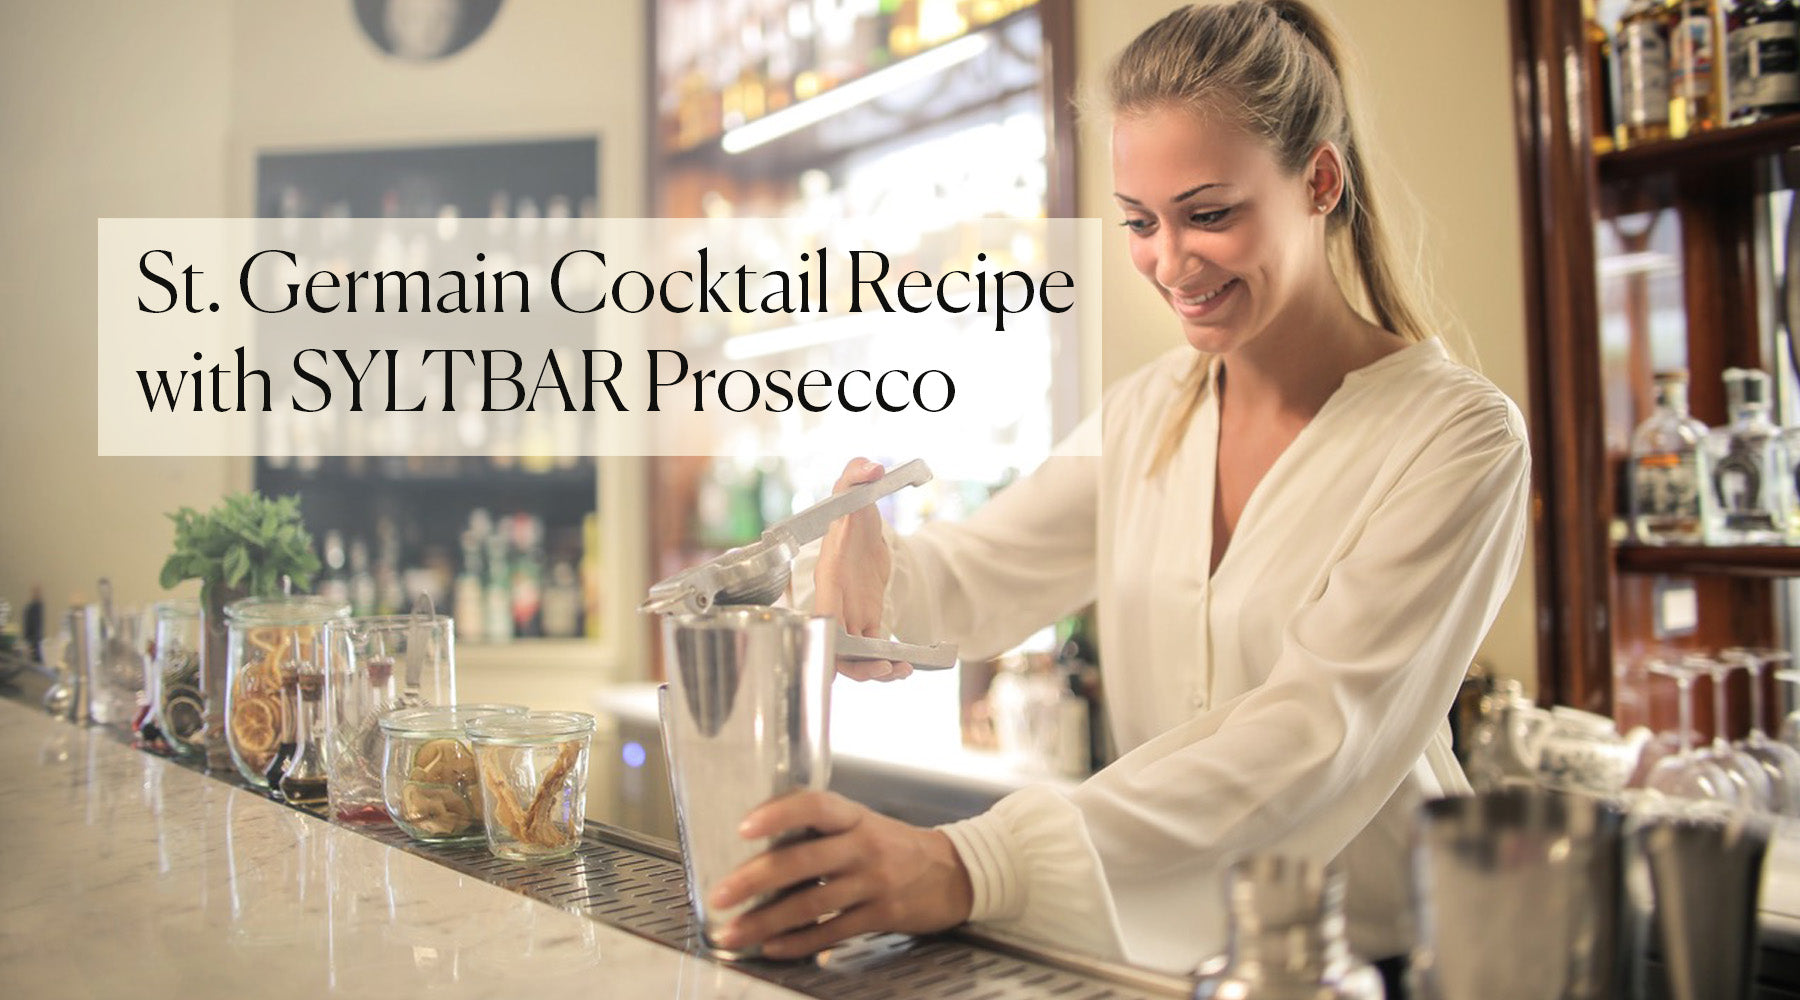 St. Germain Cocktail Recipe with Prosecco